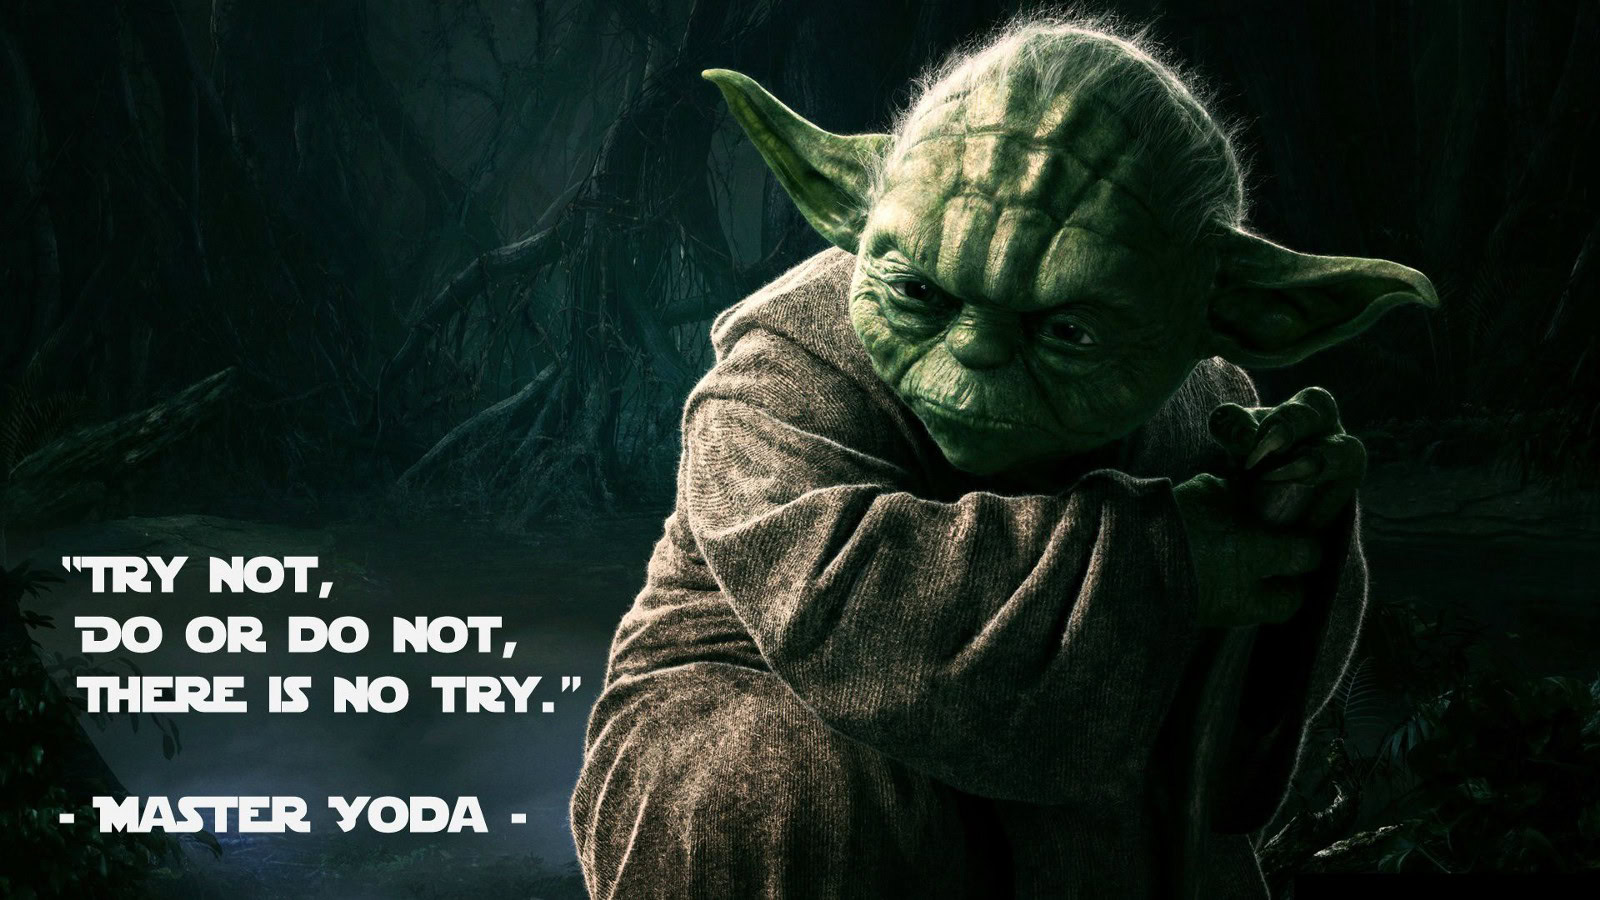 Try not, do or do not, there is no try - Master yoda